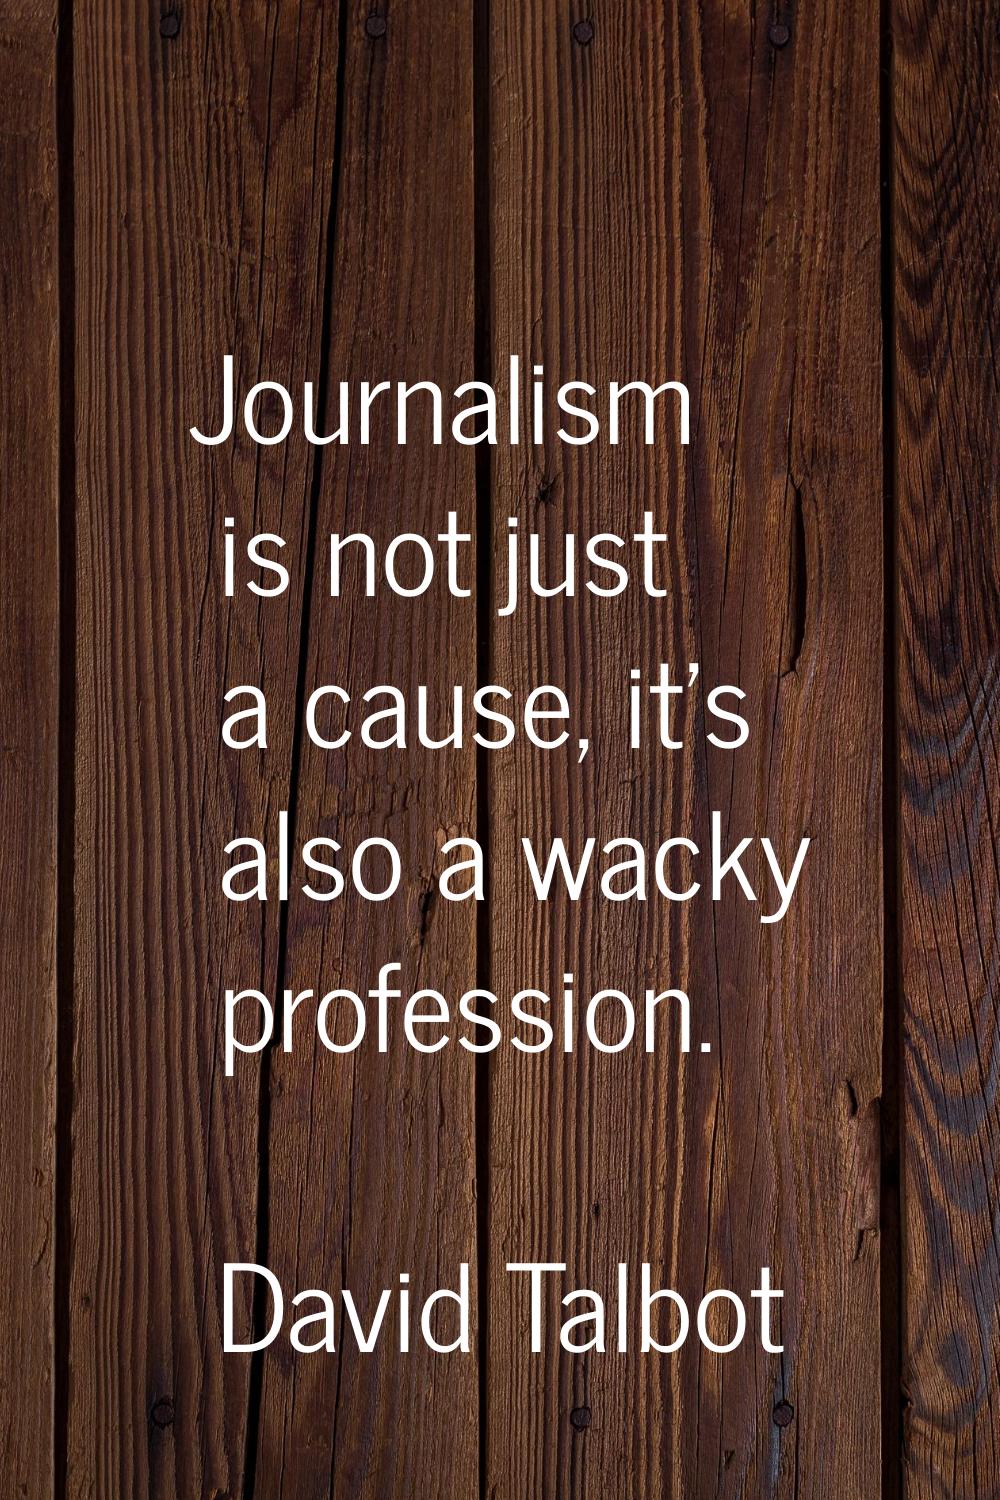 Journalism is not just a cause, it's also a wacky profession.